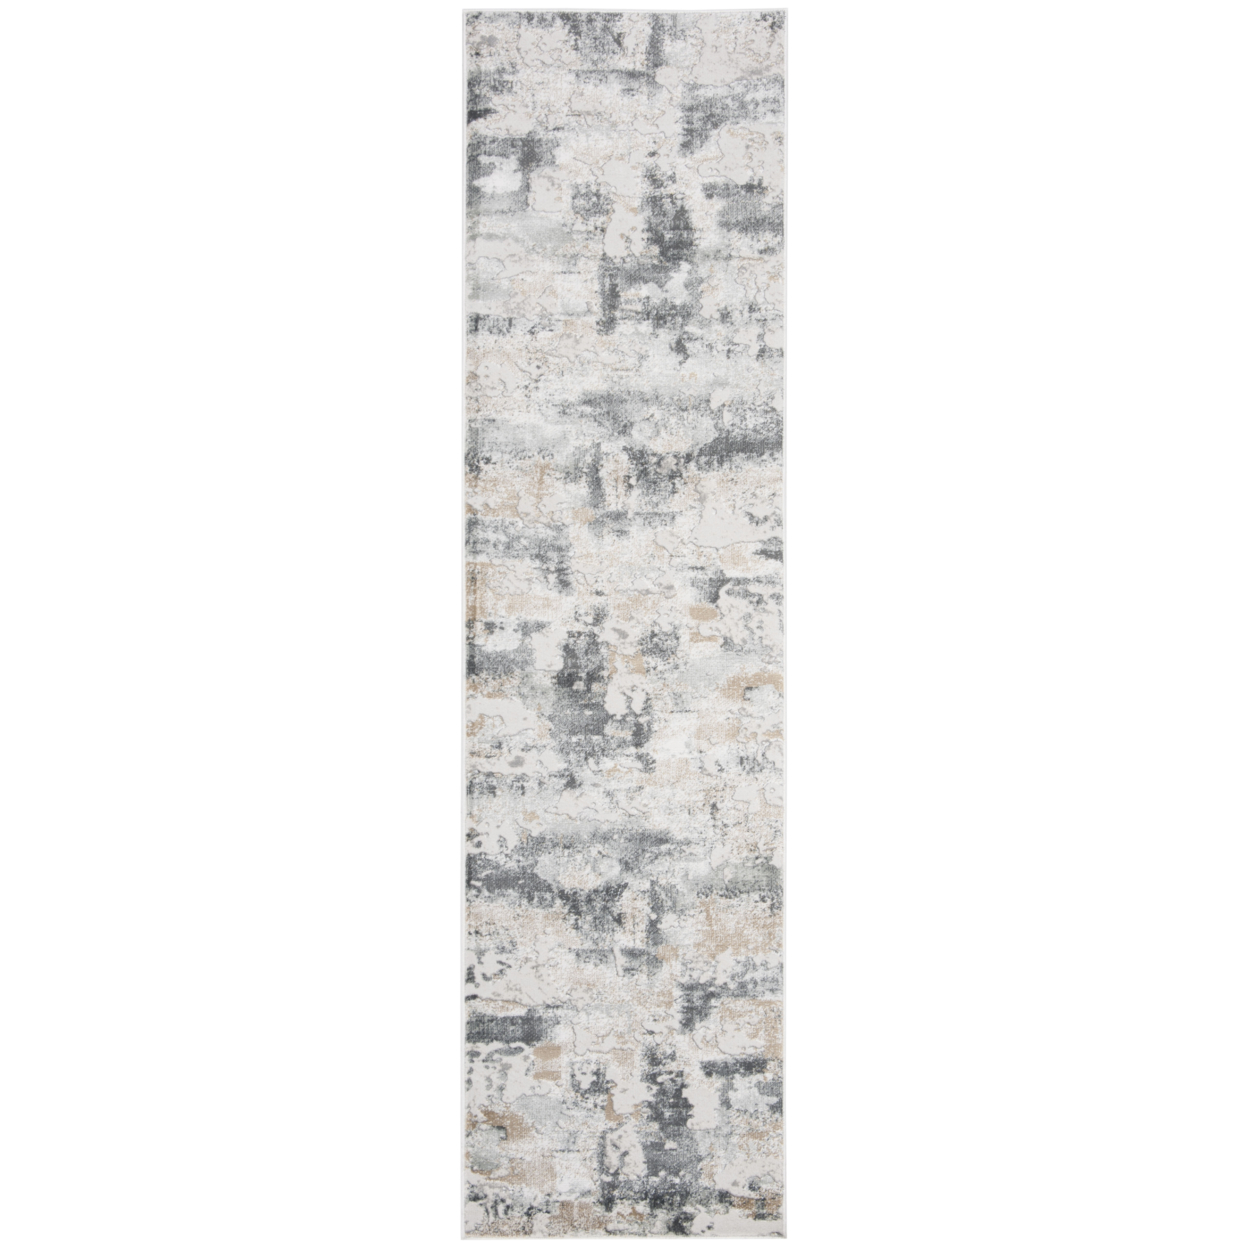 SAFAVIEH Vogue Collection VGE142A Beige / Charcoal Rug - 2' X 14'